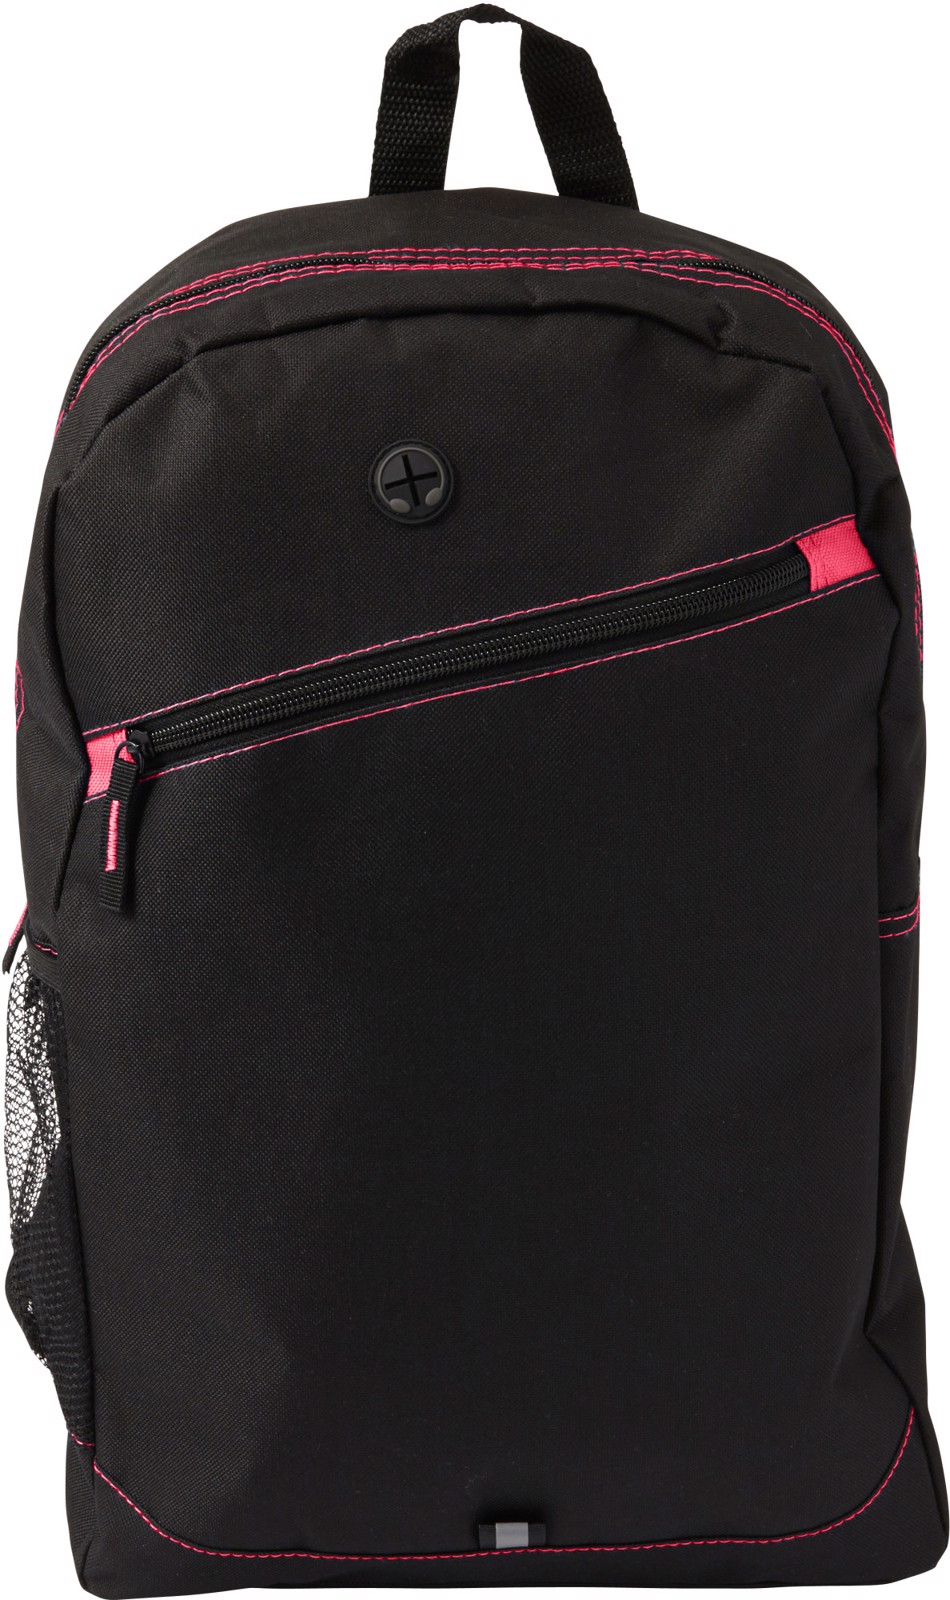 Polyester (600D) backpack - Red